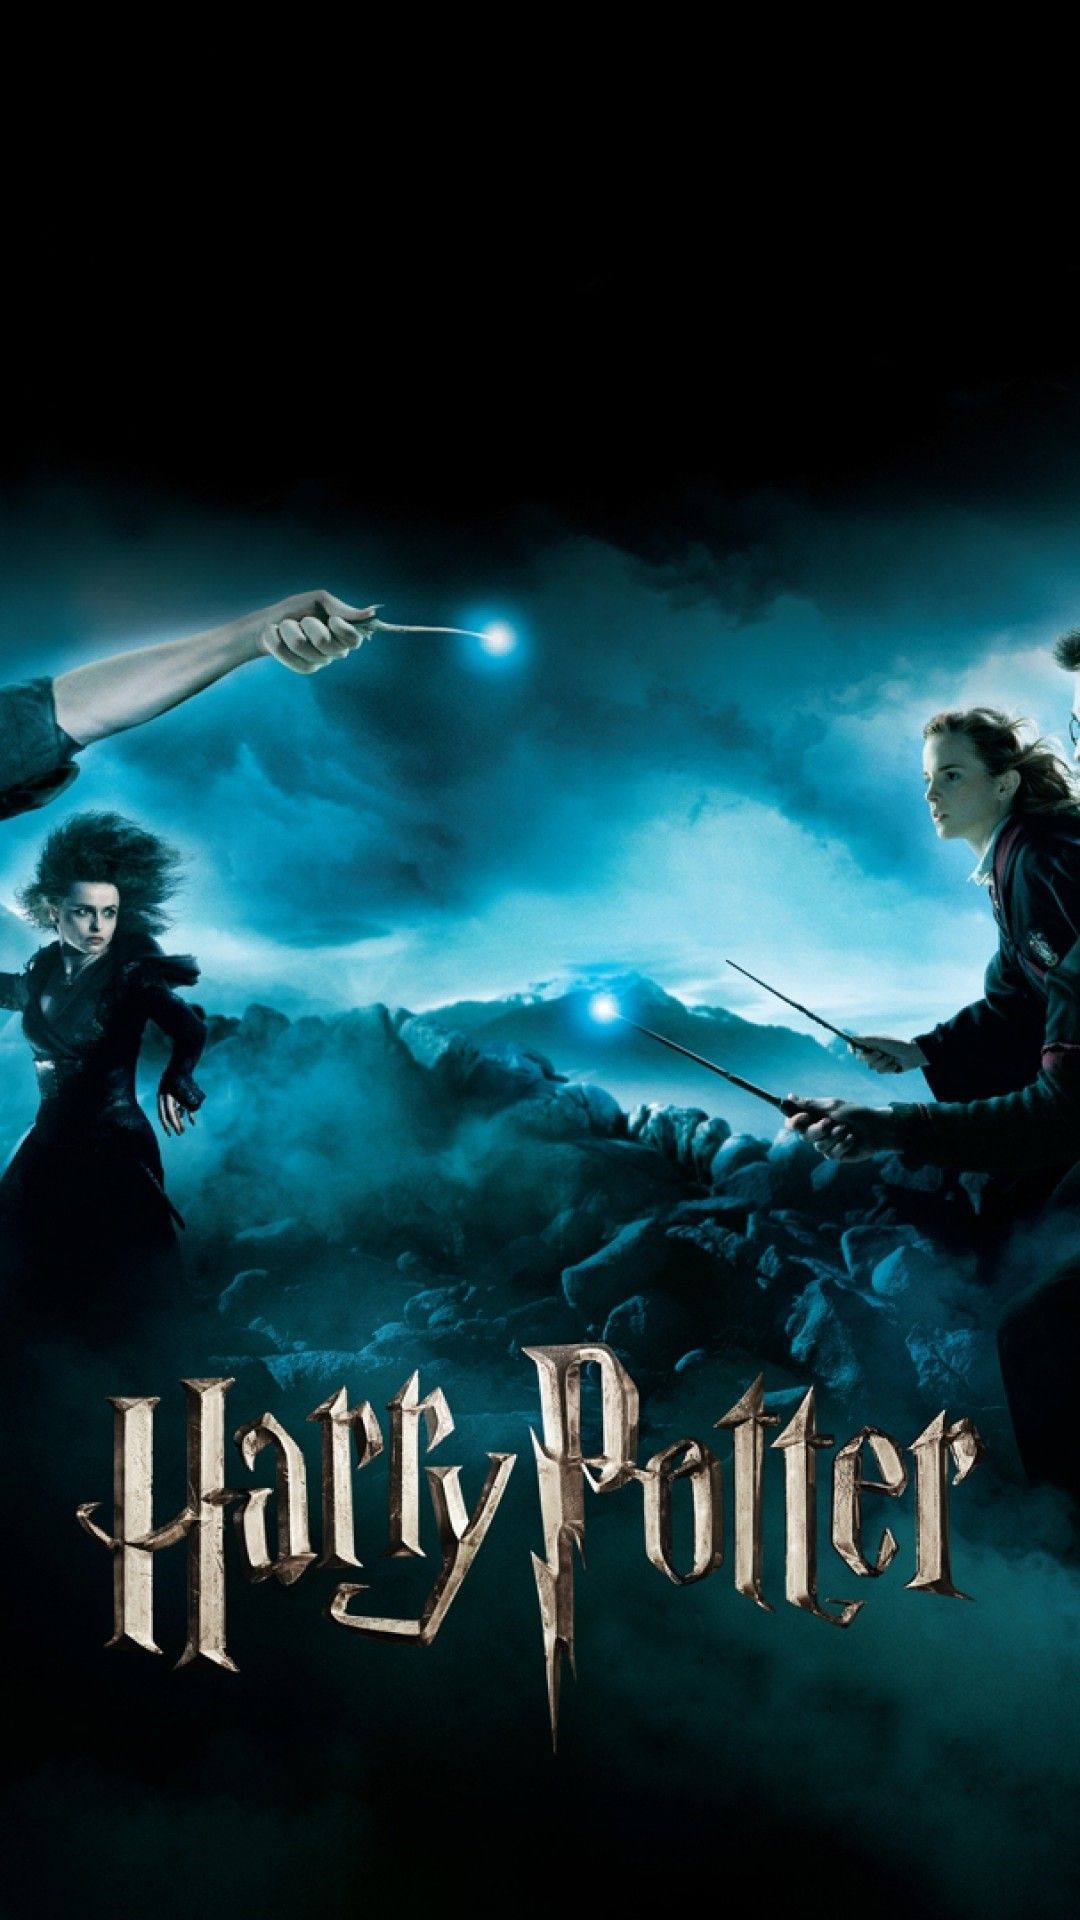 Harry Potter Wallpapers for All iPhone Devices